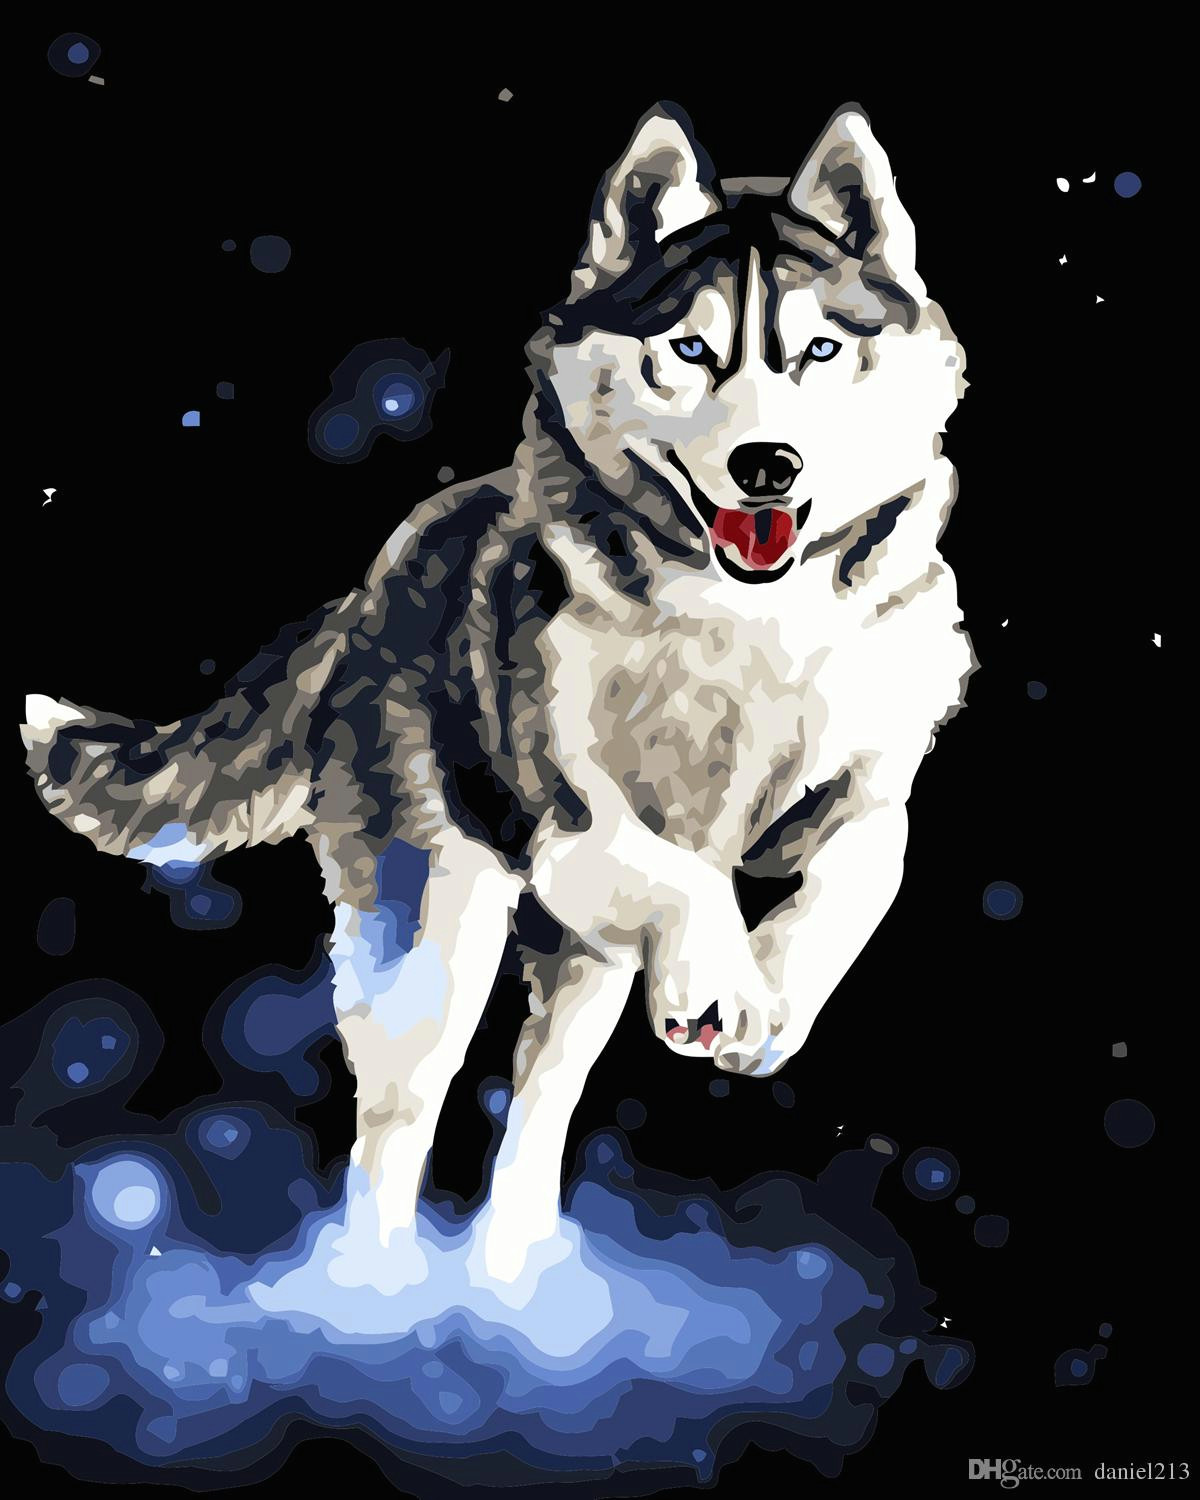 2019 coming pet husky dog 16x20 inches diy paint on canvas drawing by numbers kits art acrylic oil painting frame for adult teen from daniel213